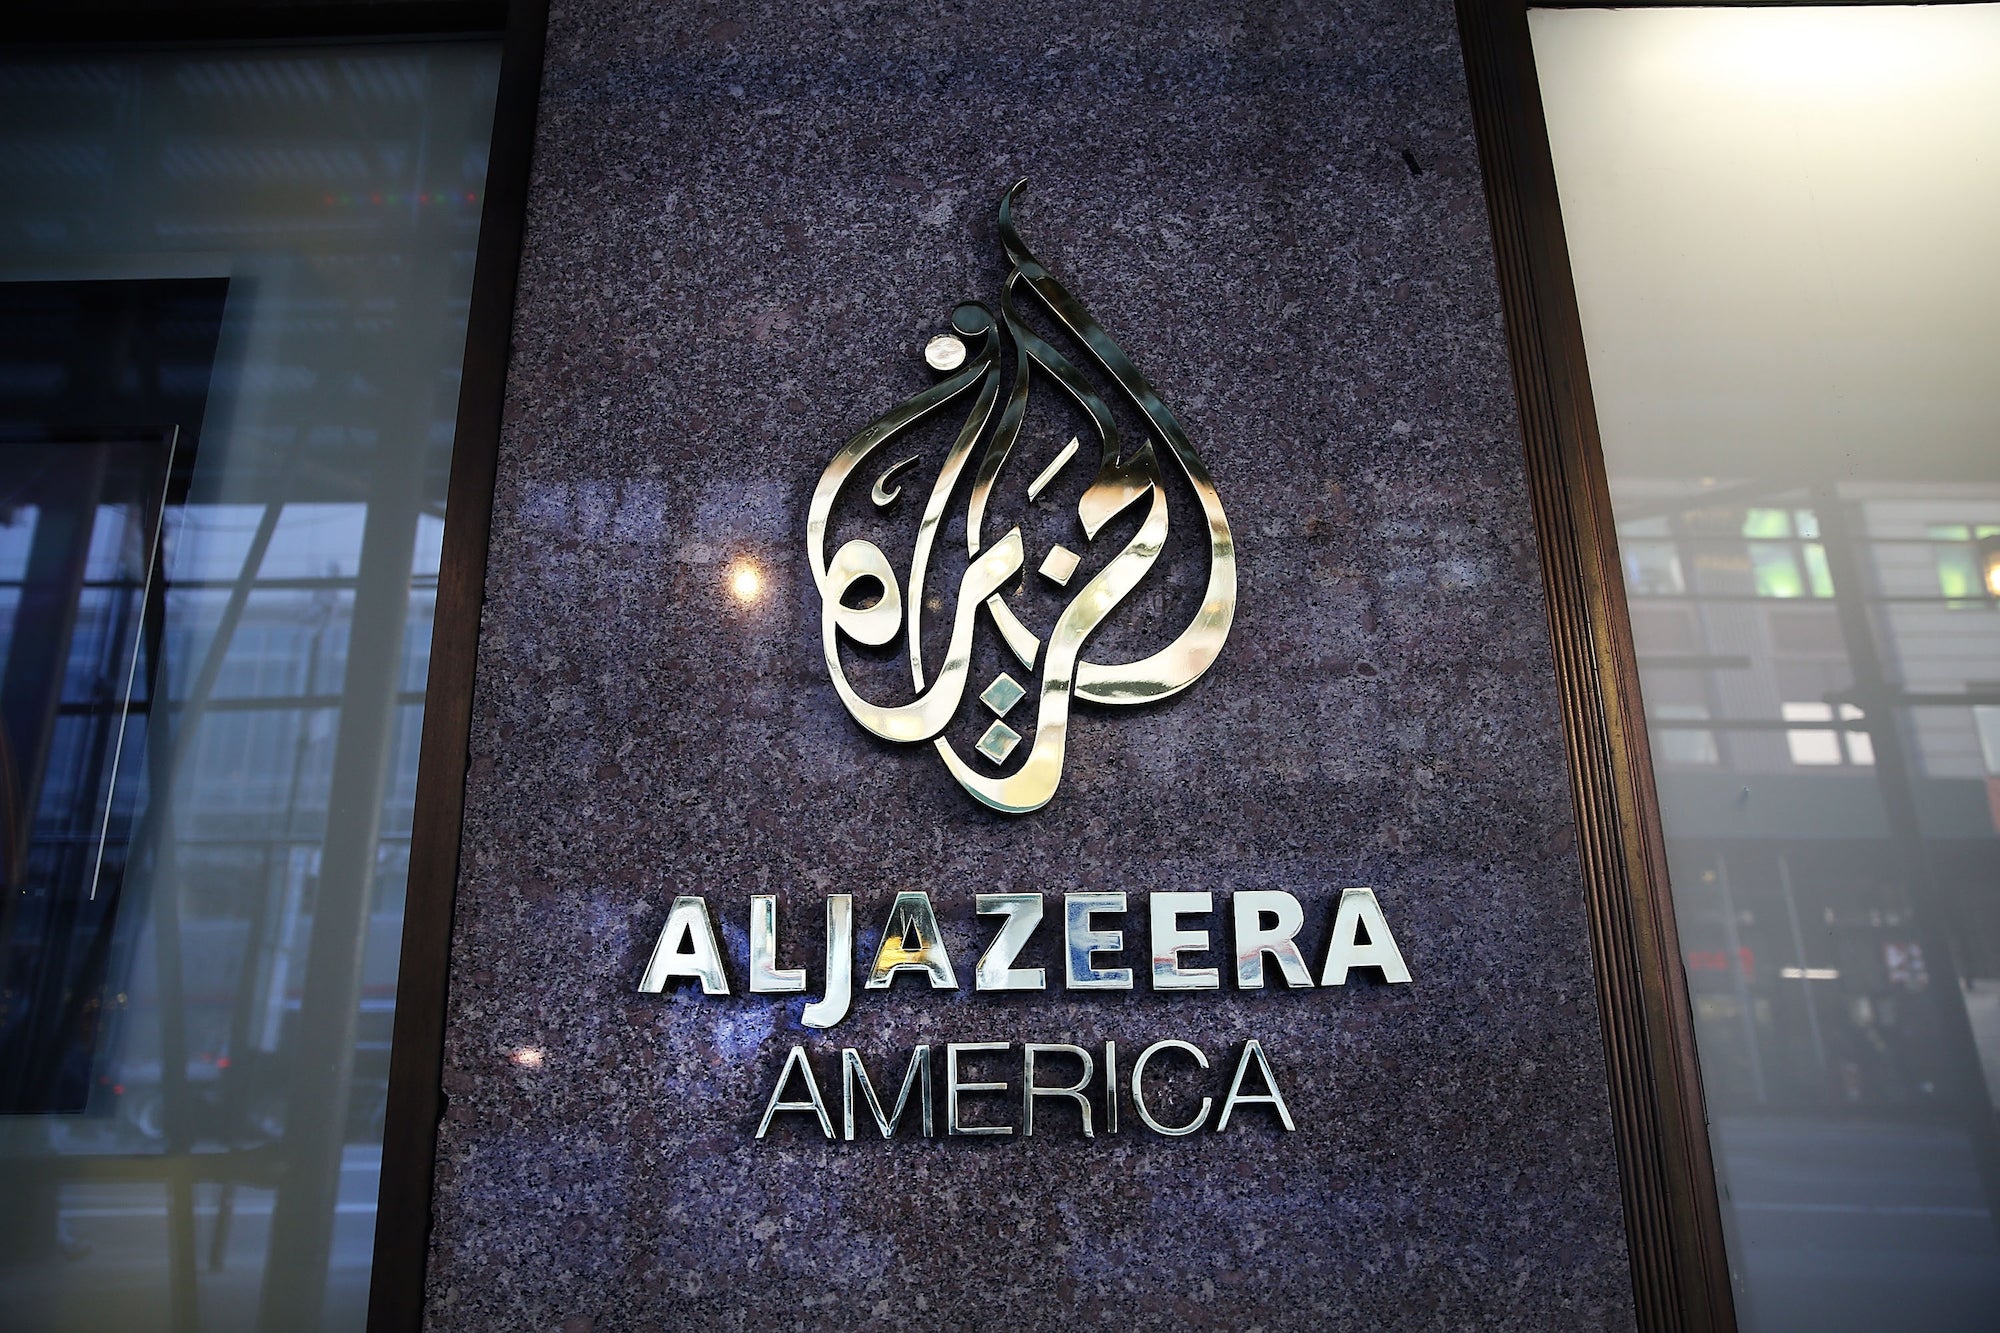 Al Jazeera announced on Wednesday that they would cancel their American cable operations.